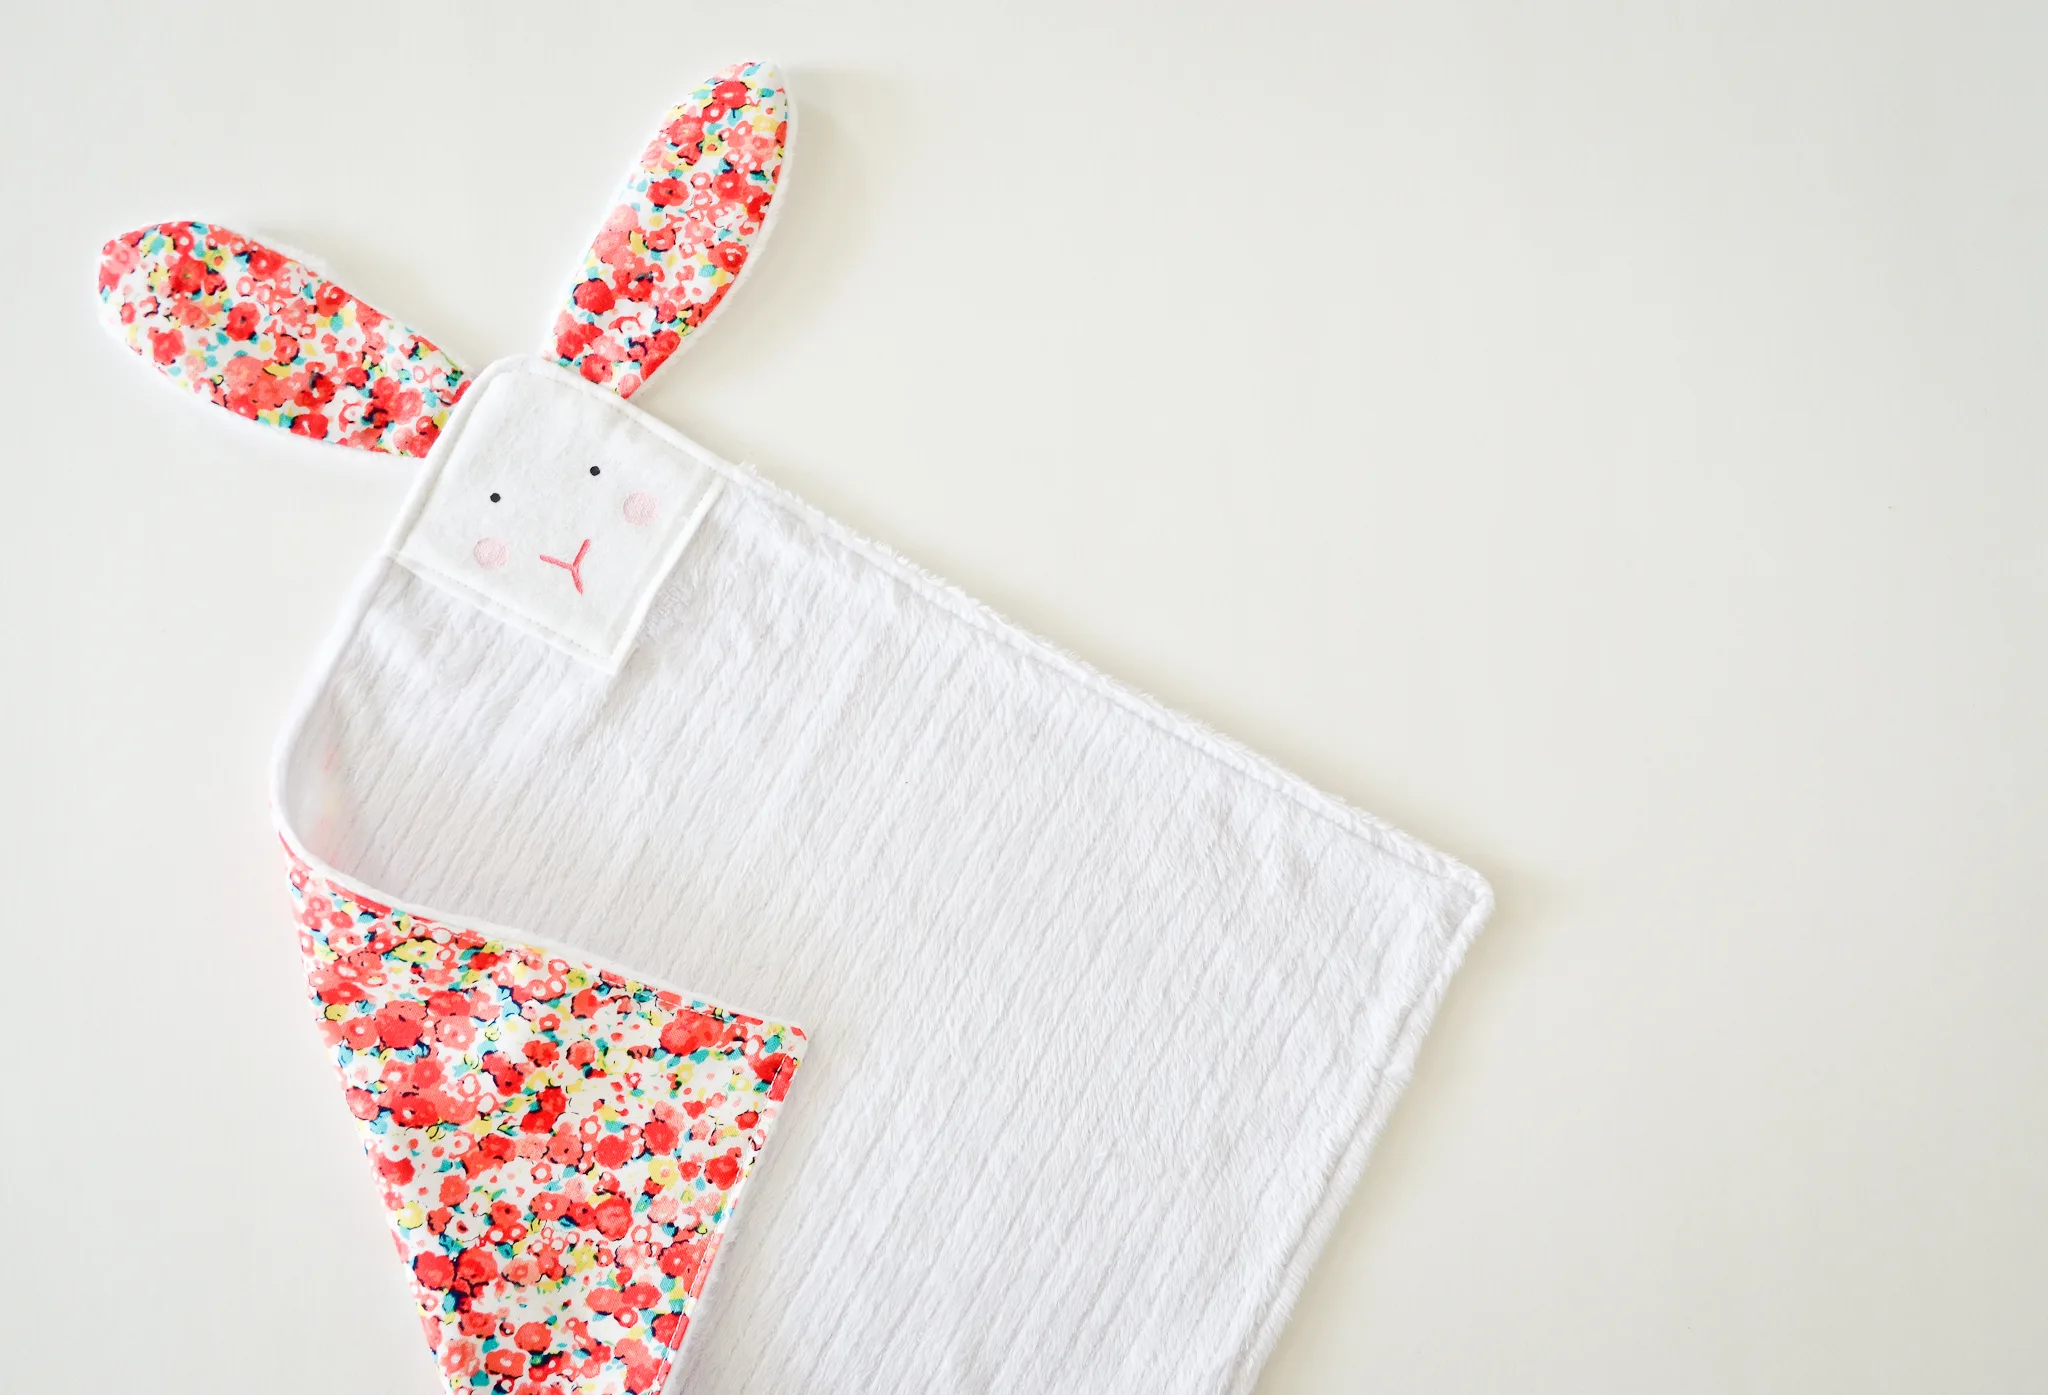 How to Make a No-Sew Blanket: 8 Methods You Haven't Seen Before